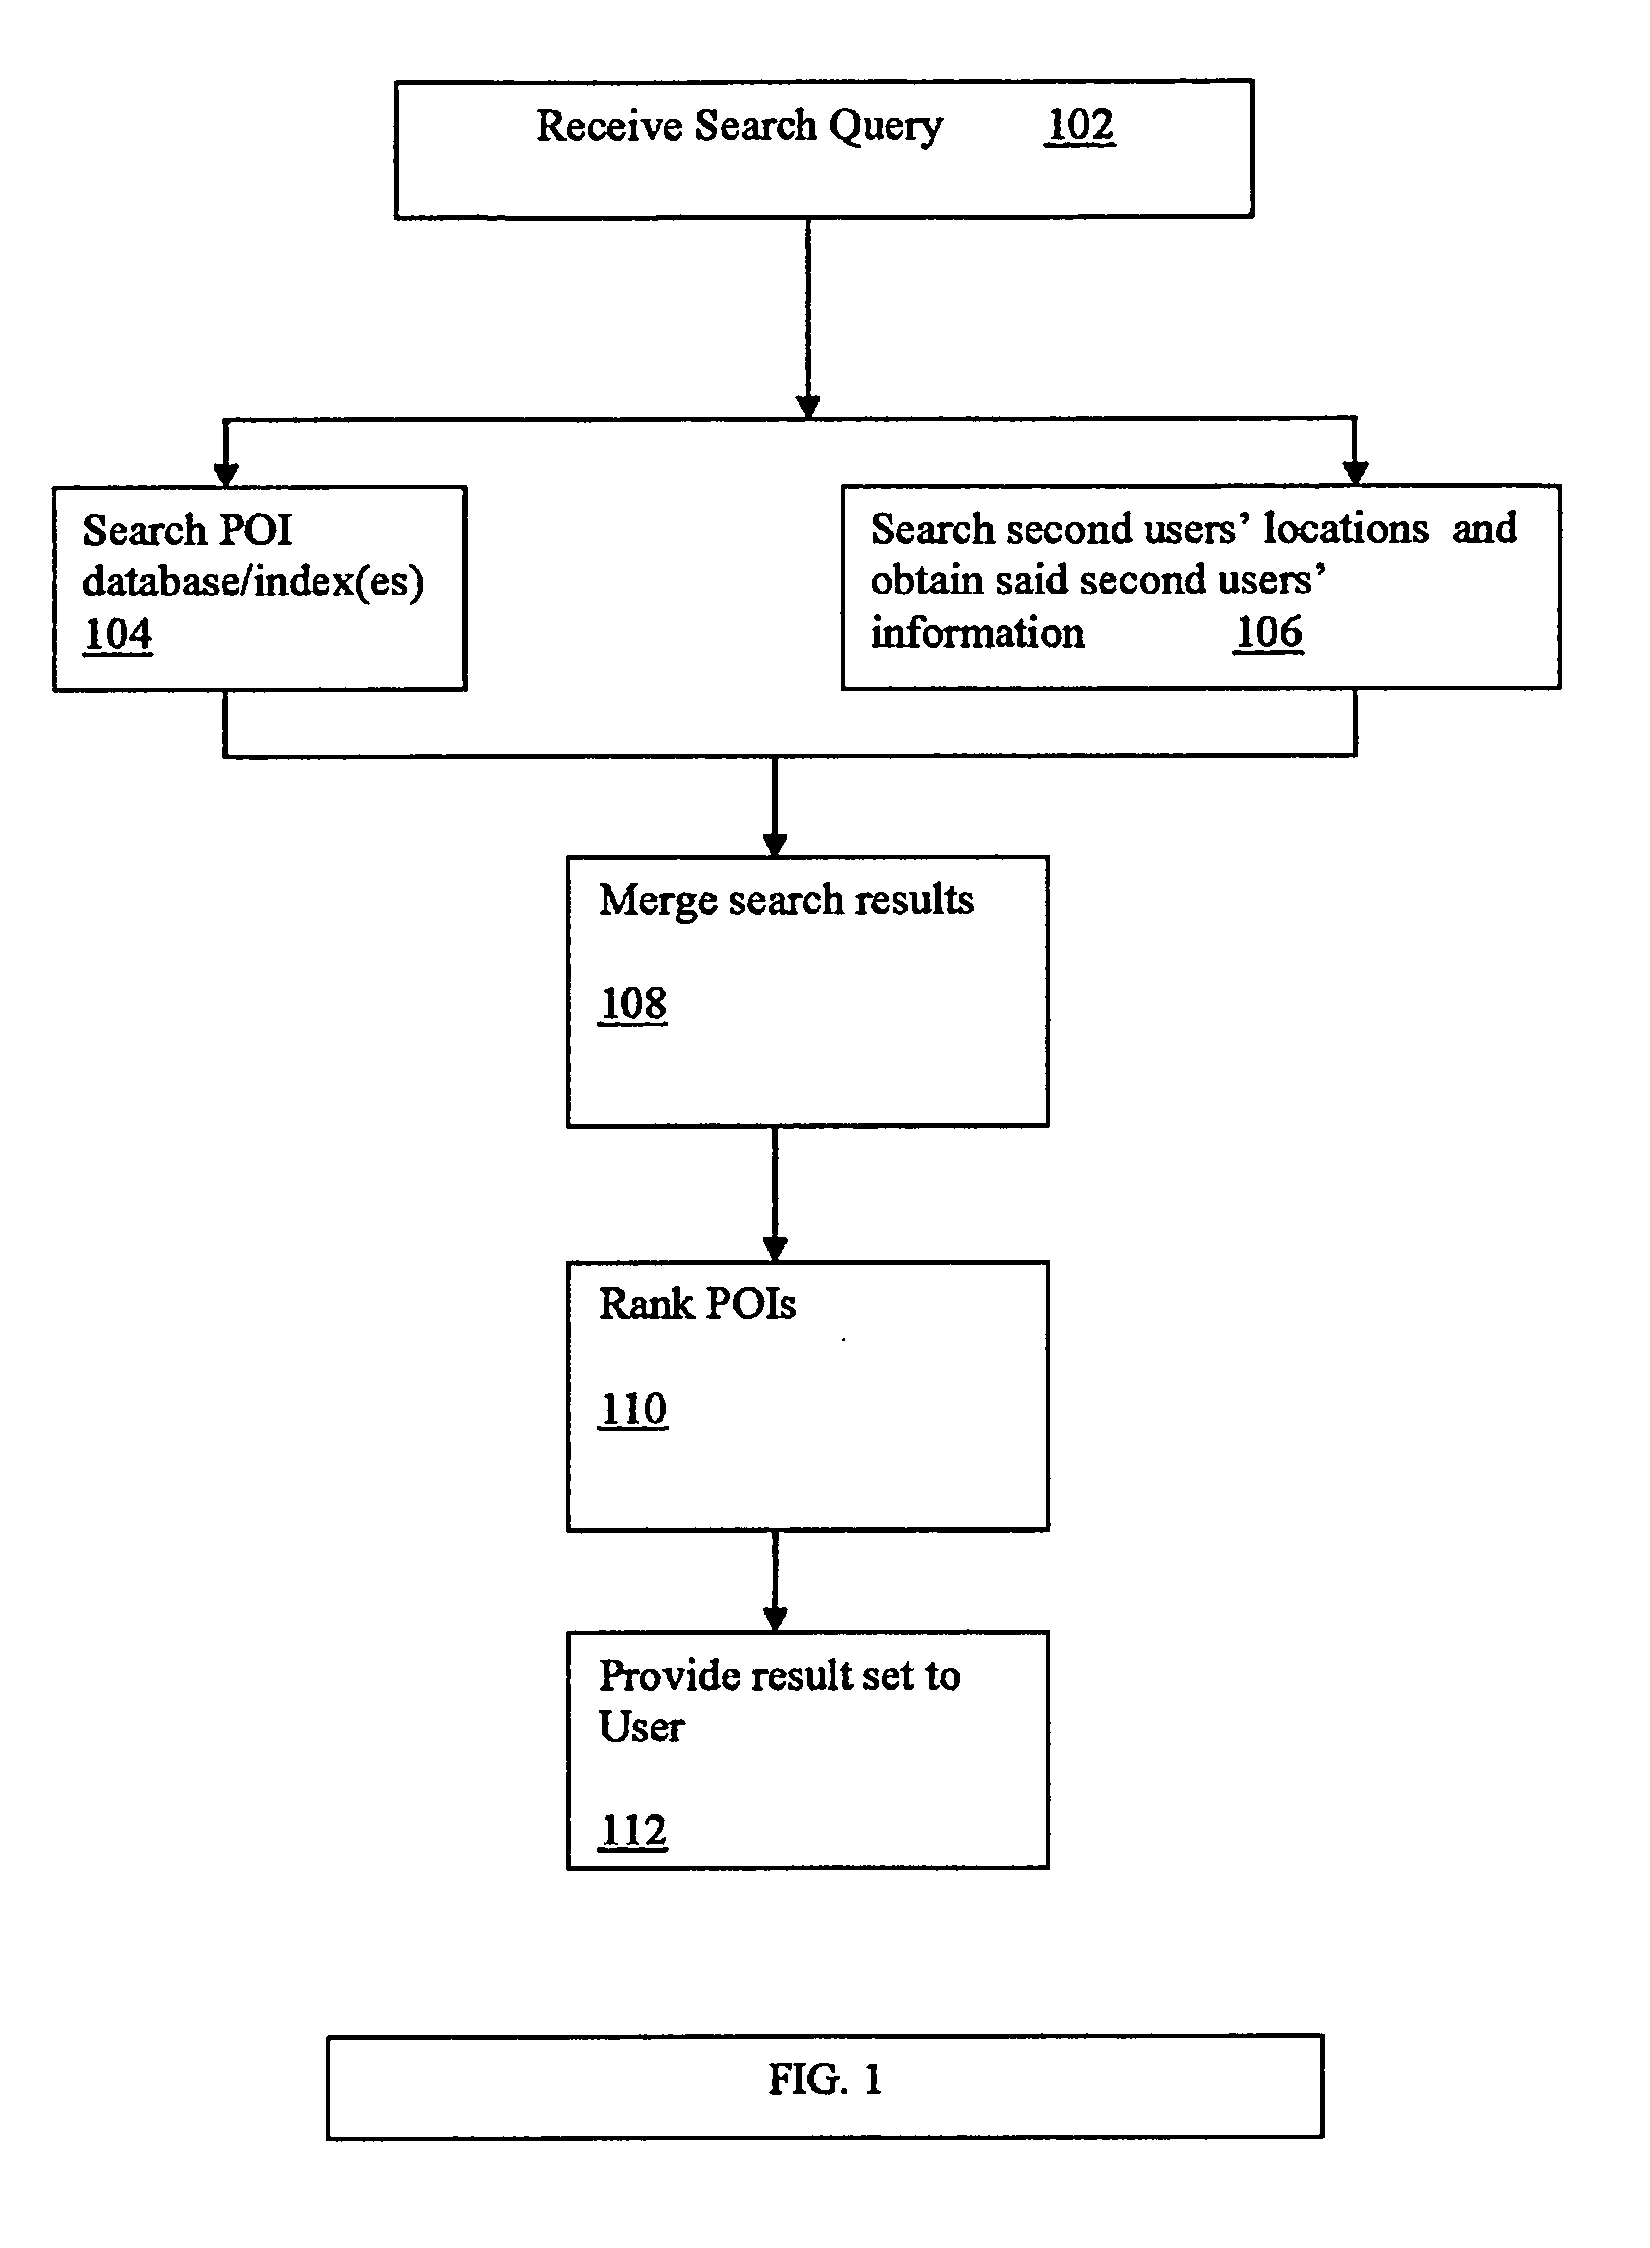 Method and system for generating and presenting search results that are based on location-based information from social networks, media, the internet, and/or actual on-site location